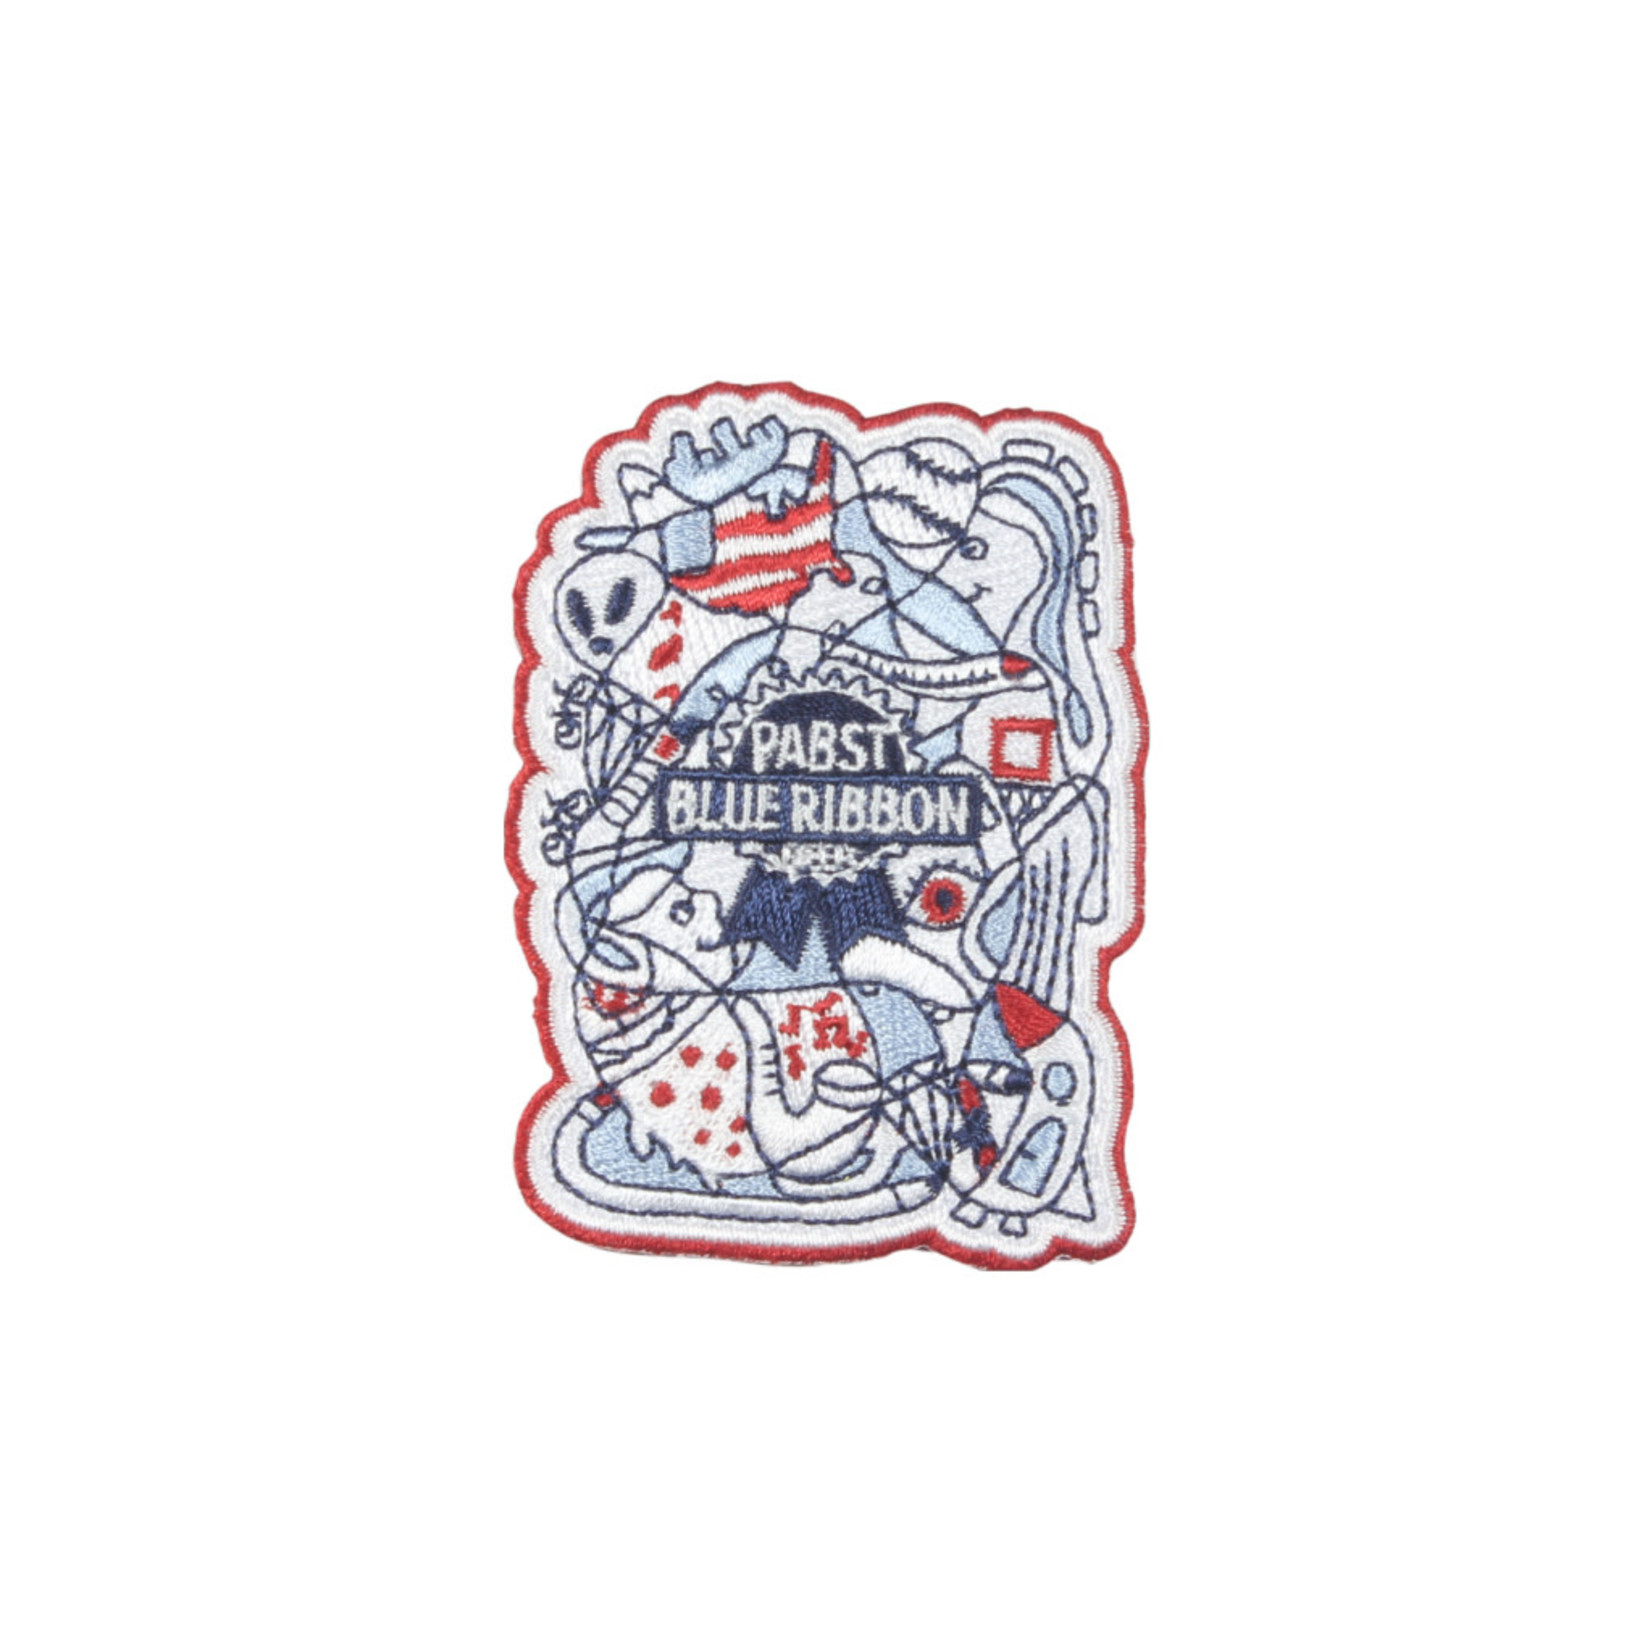 Pabst Pabst Kelly Art Patch